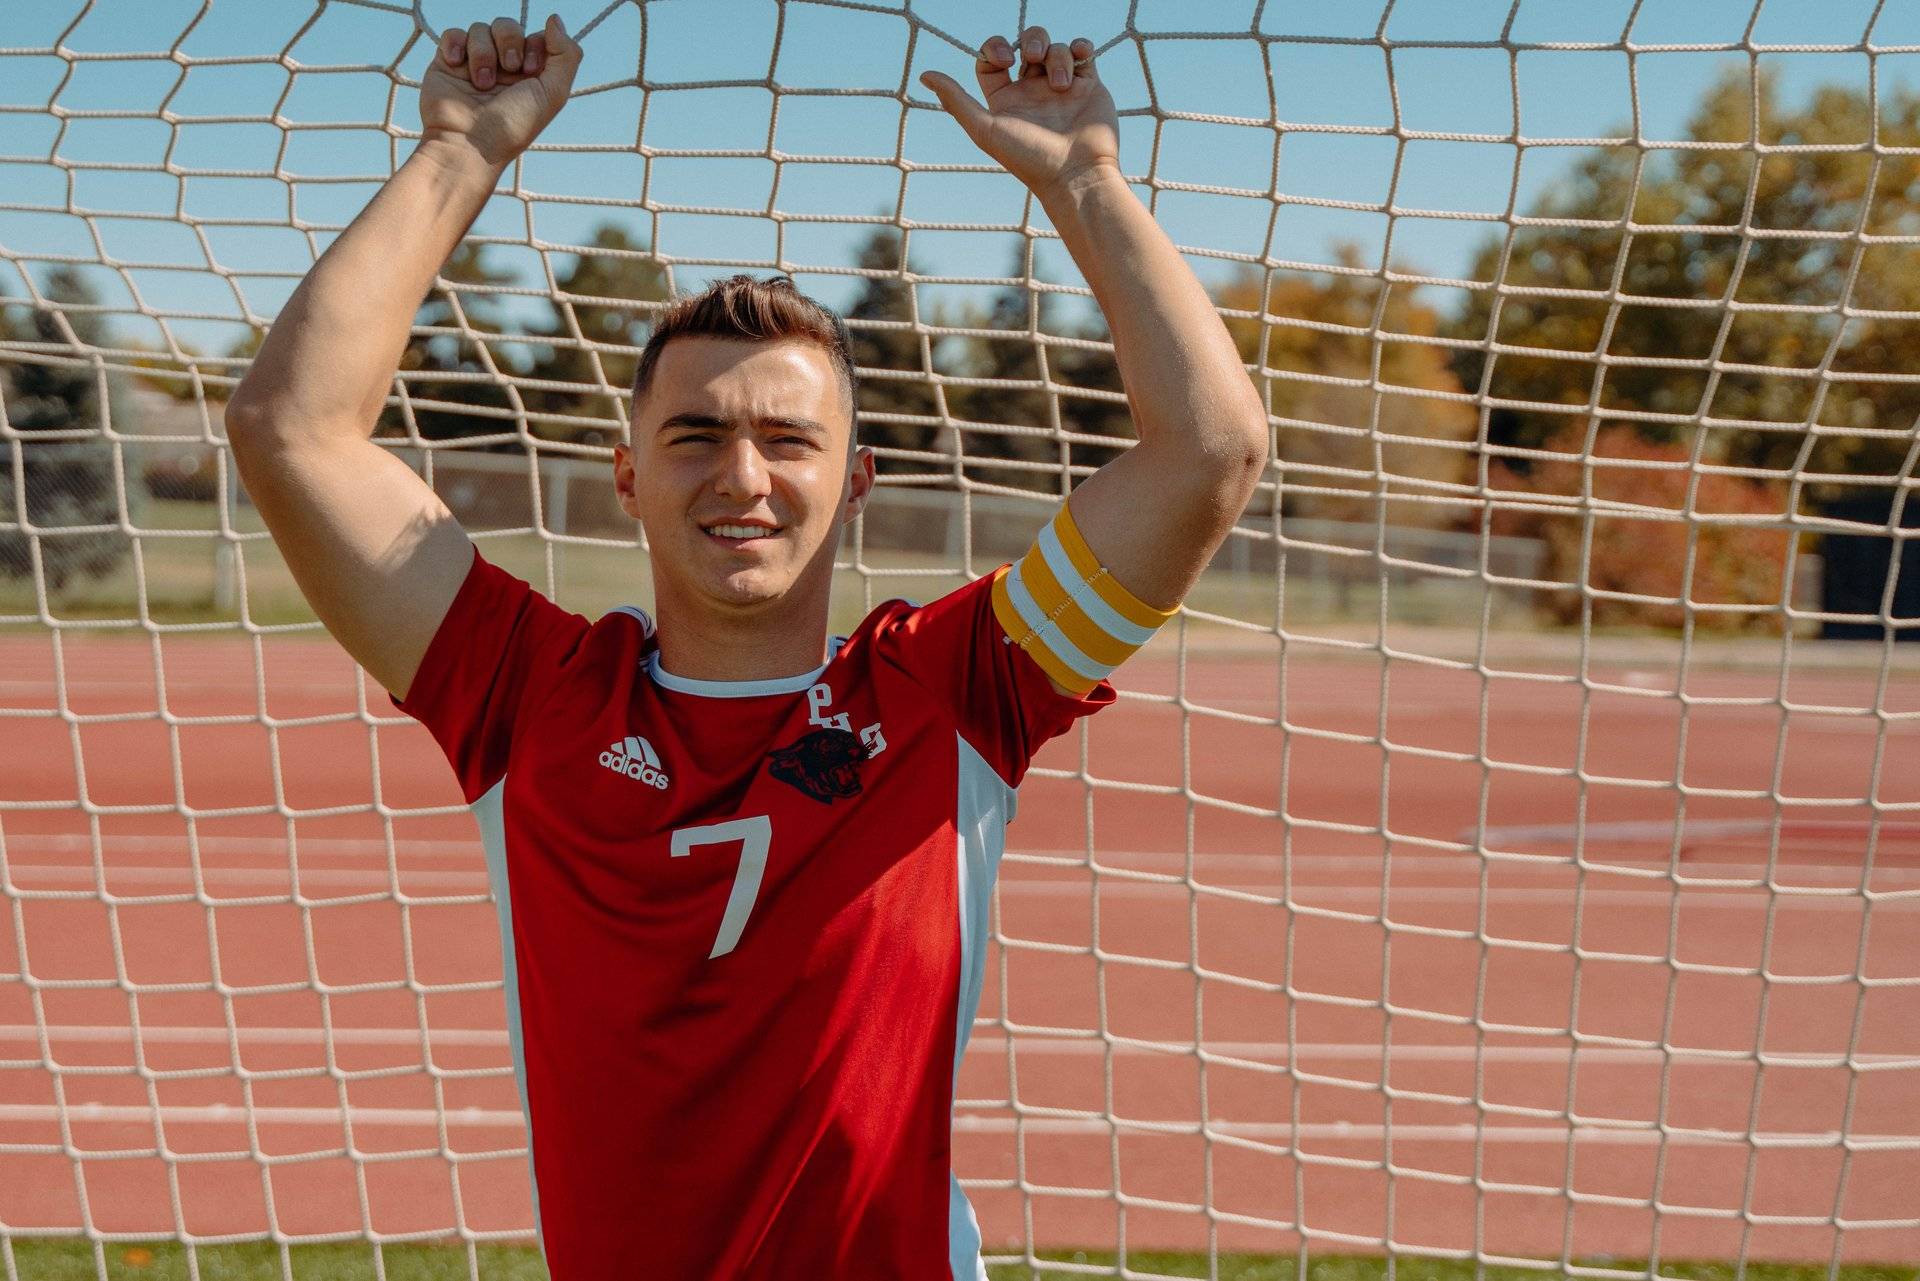 A senior standing in front of a soccer net with a soccer jersey on for senior photos.